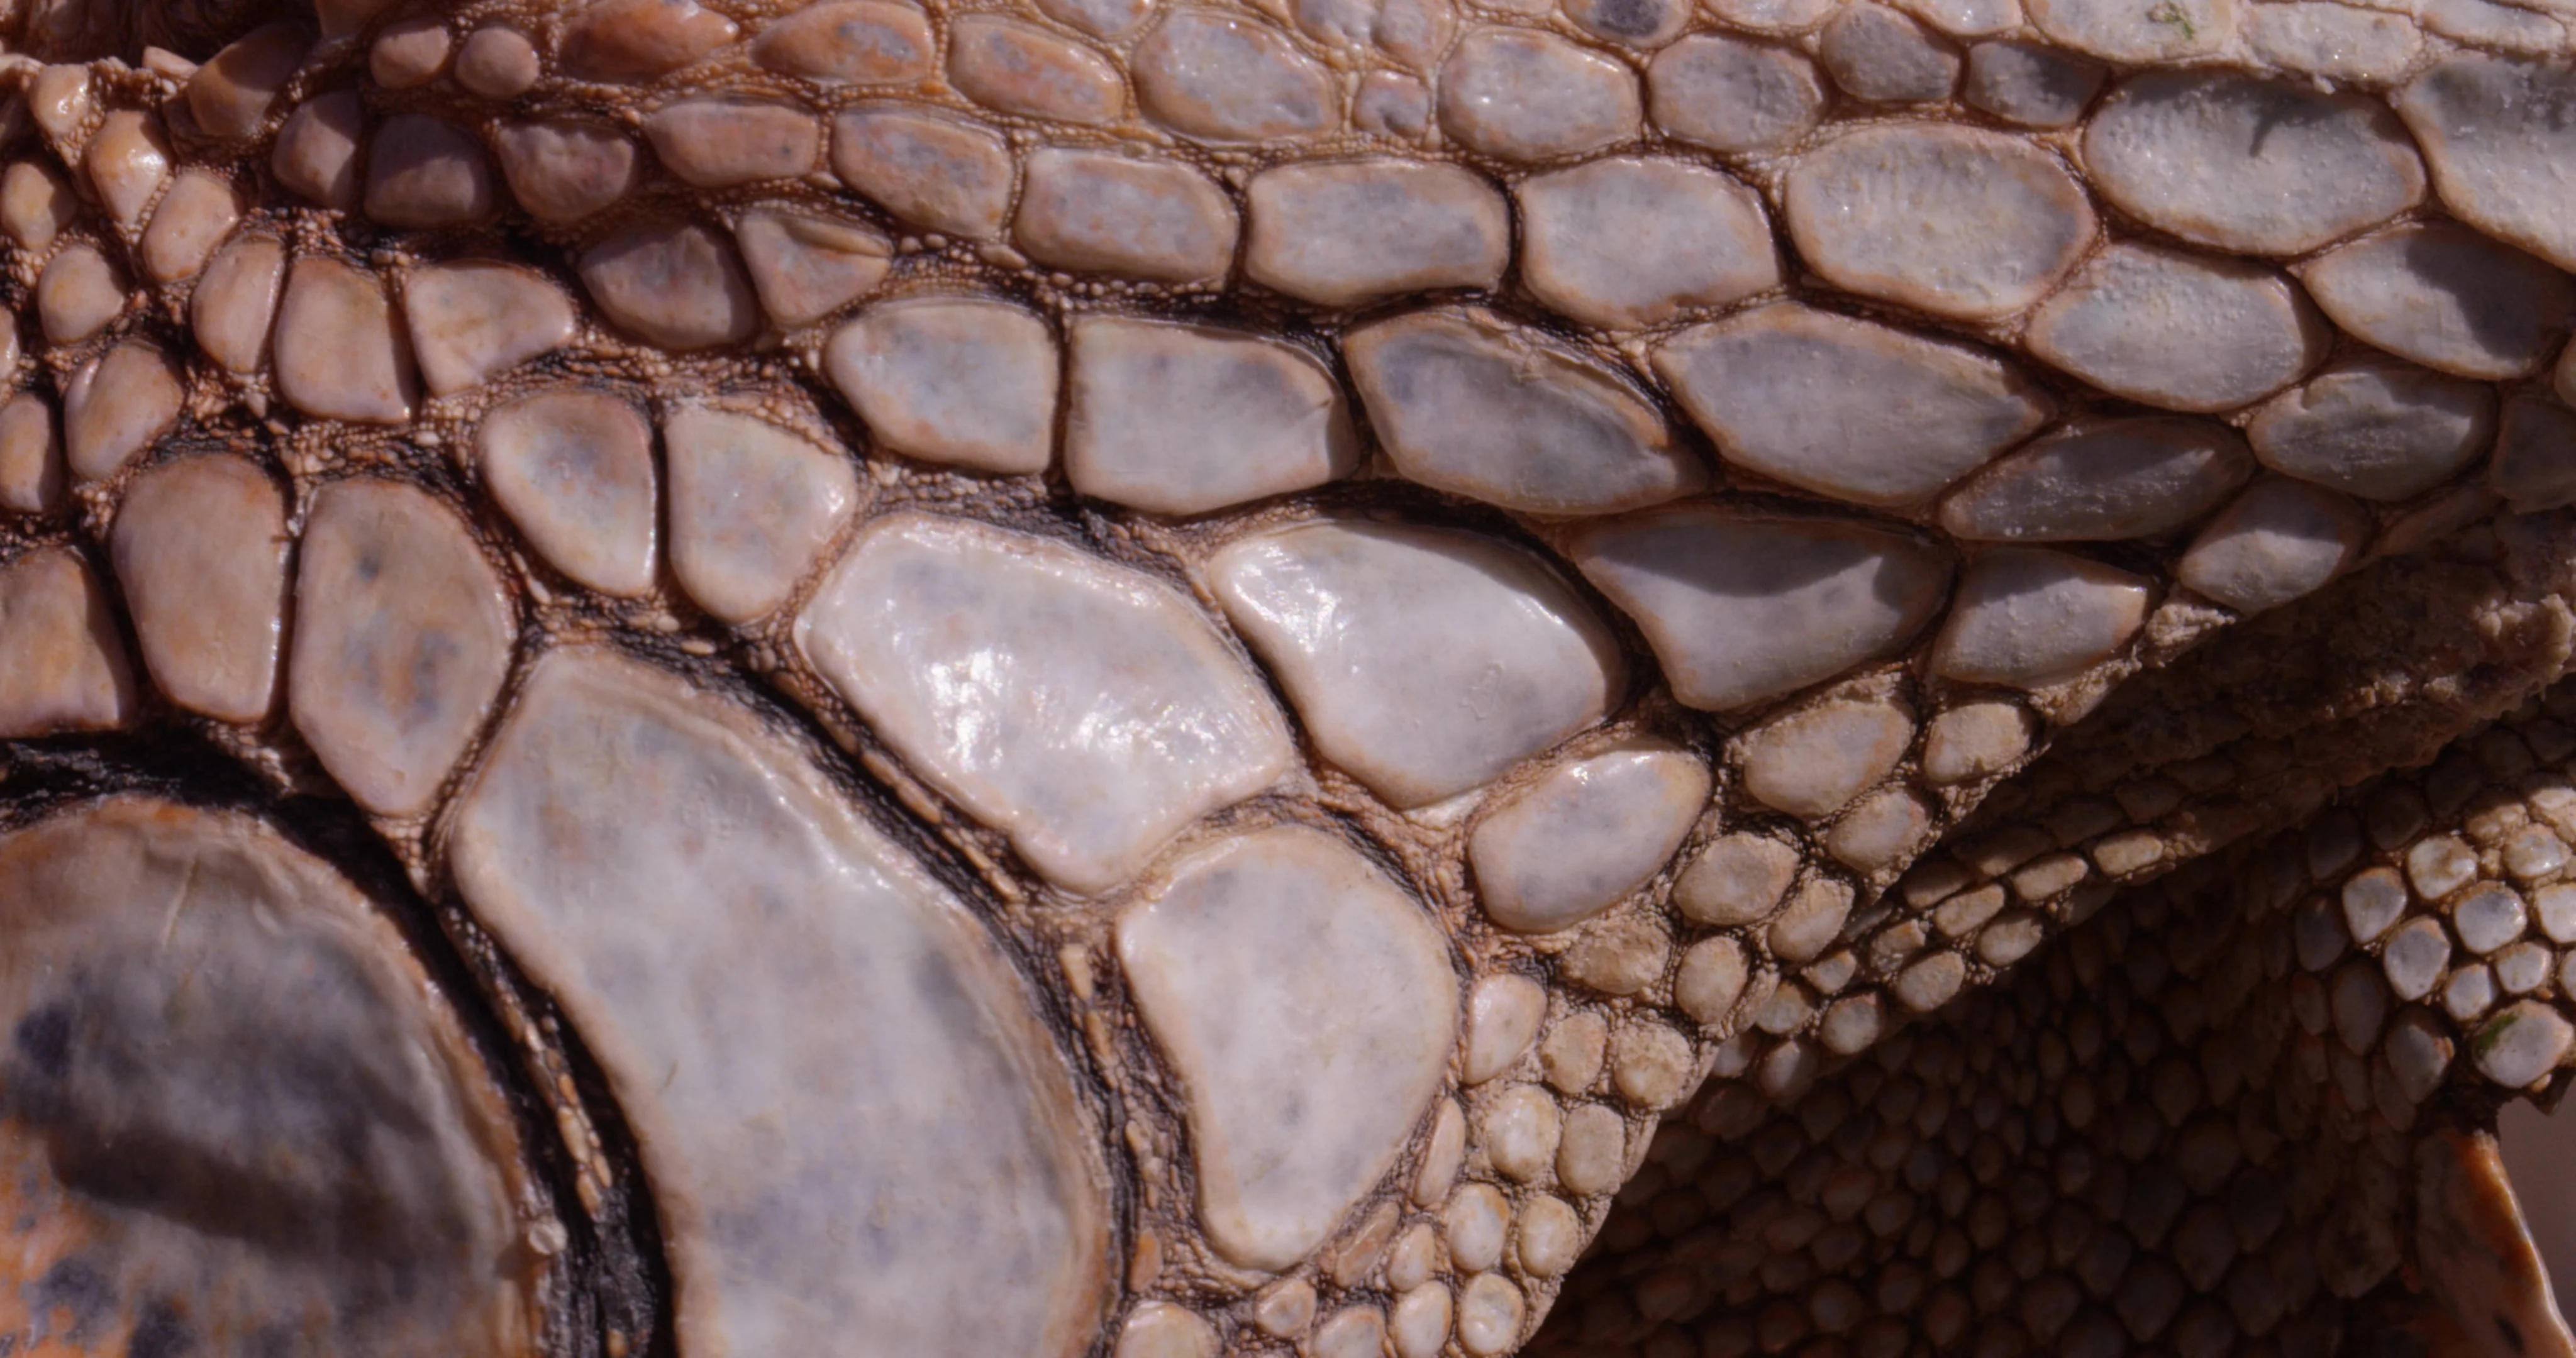 https://images.pond5.com/reptile-scales-pattern-extreme-close-footage-087953002_prevstill.jpeg